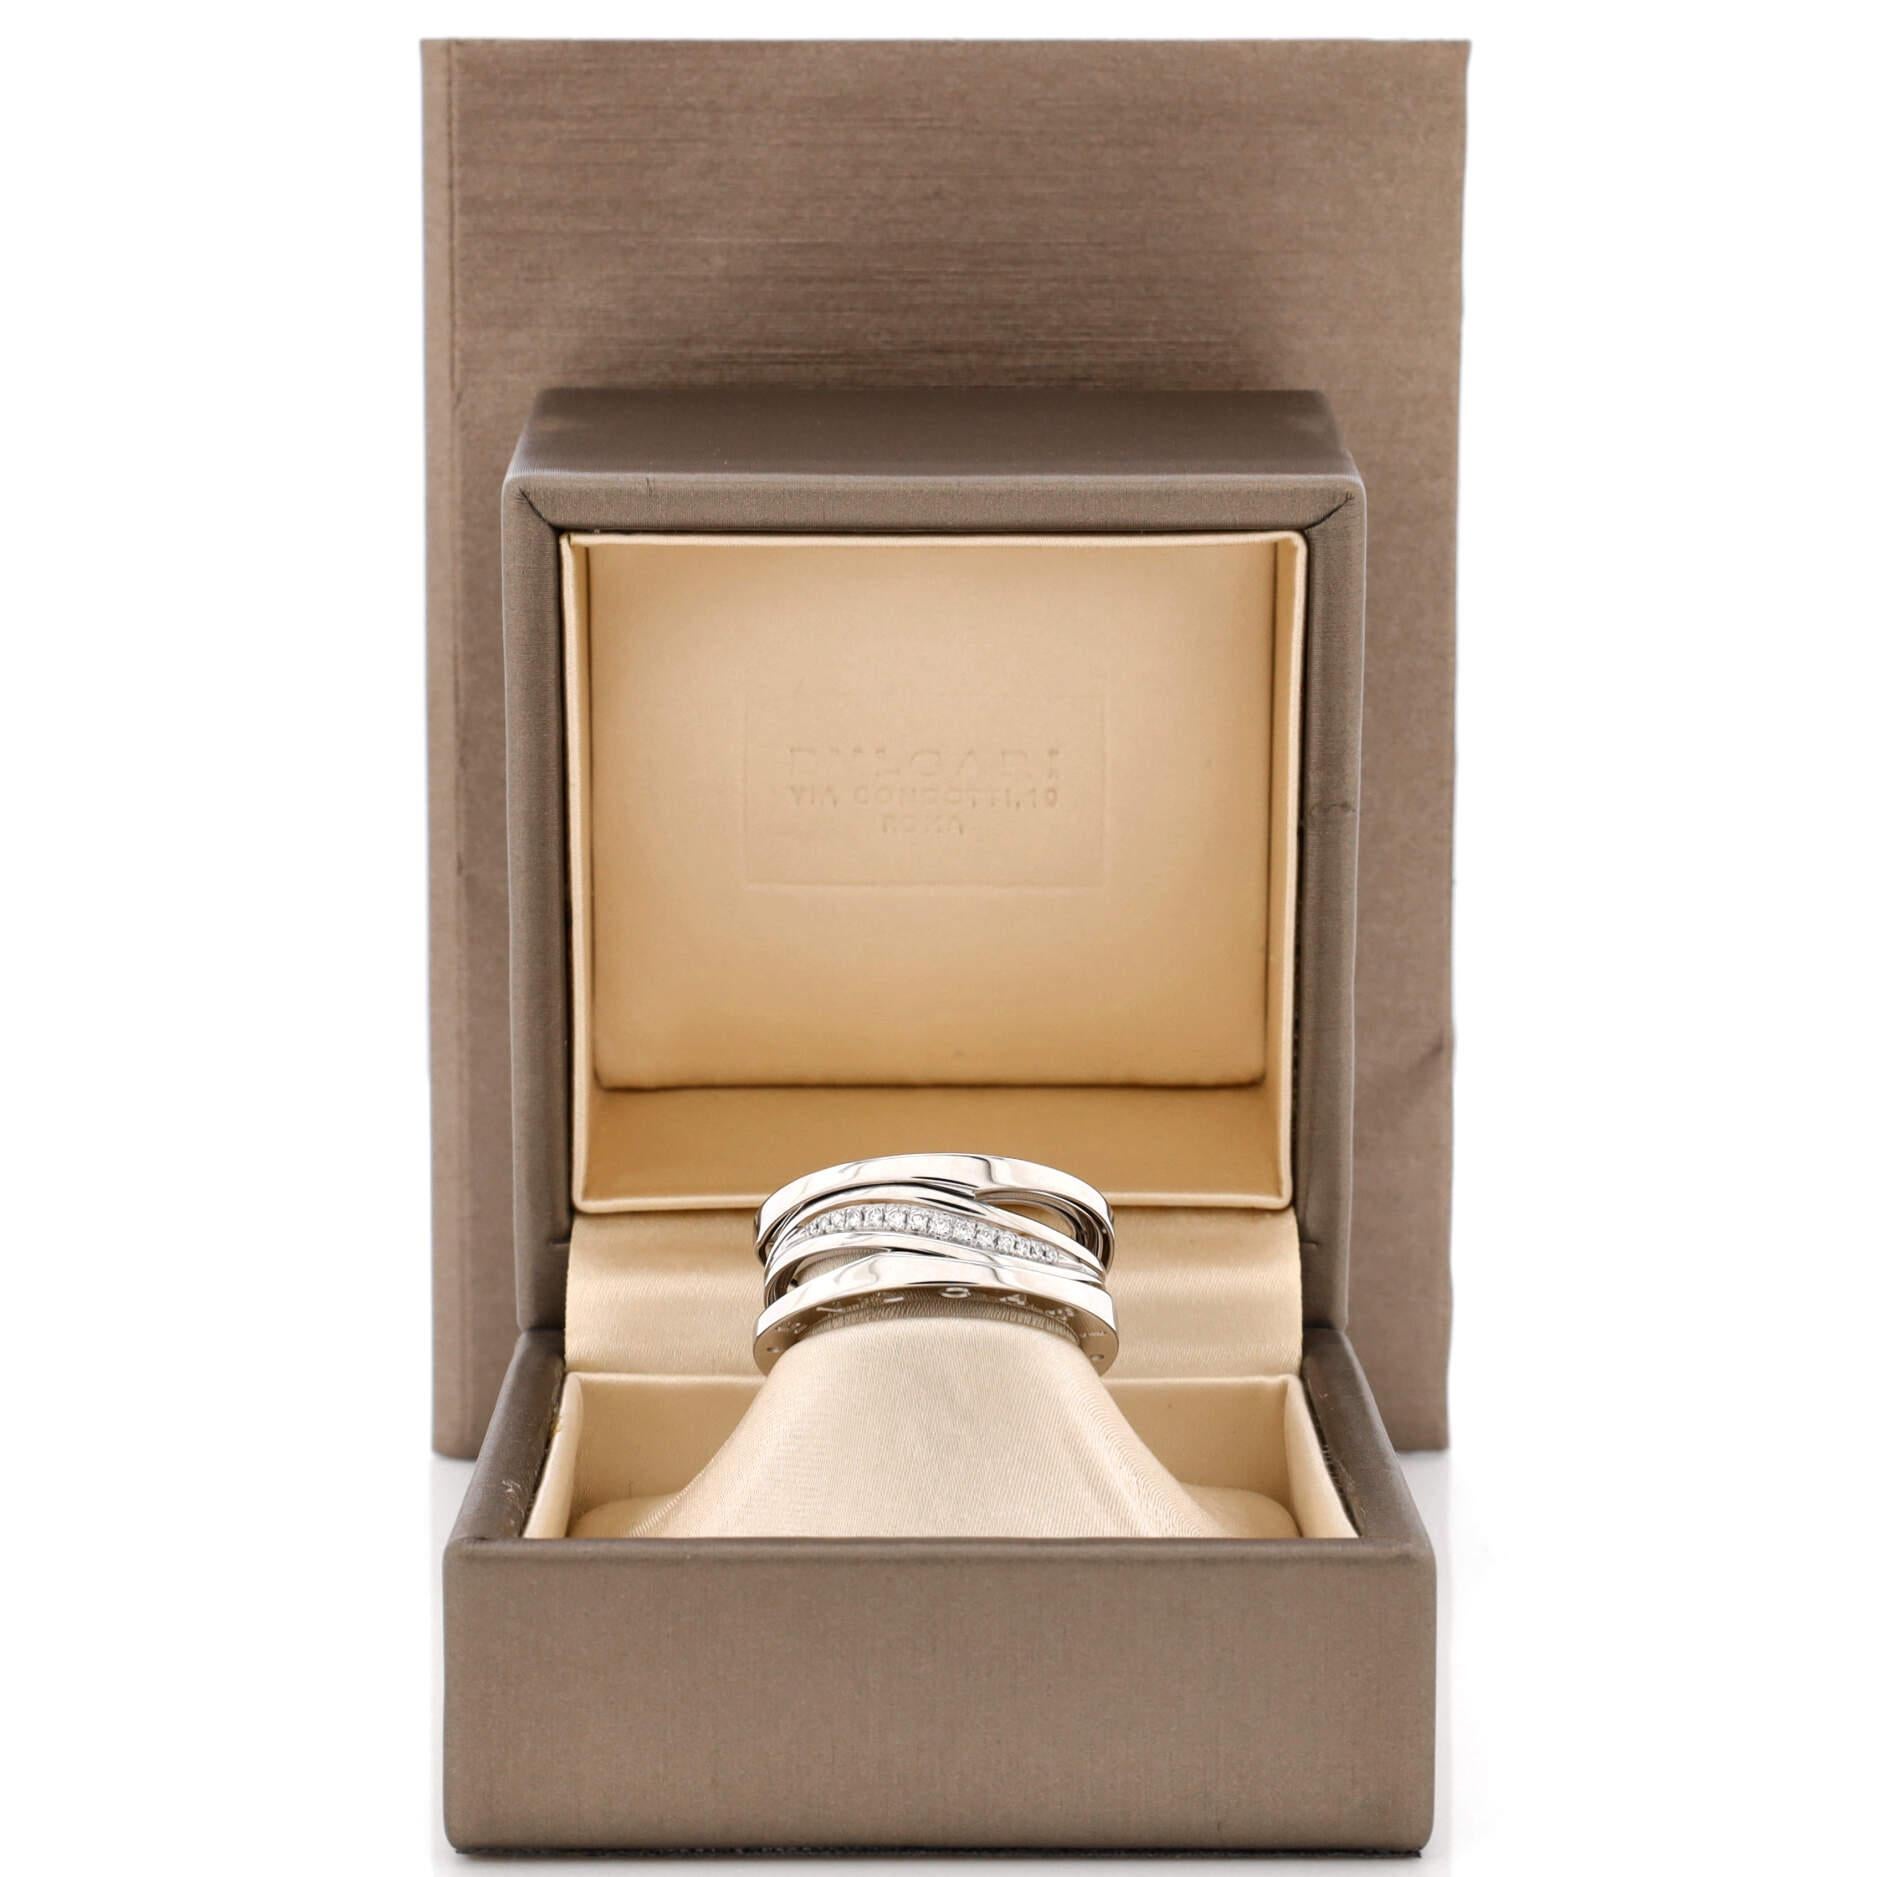 Condition: Excellent. Faint wear throughout.
Accessories: No Accessories
Measurements: Size: 8.75 - 59, Width: 9.40 mm
Designer: Bvlgari
Model: B.Zero1 Design Legend Zaha Hadid Three Band Ring 18K White Gold with Diamonds
Exterior Color: White